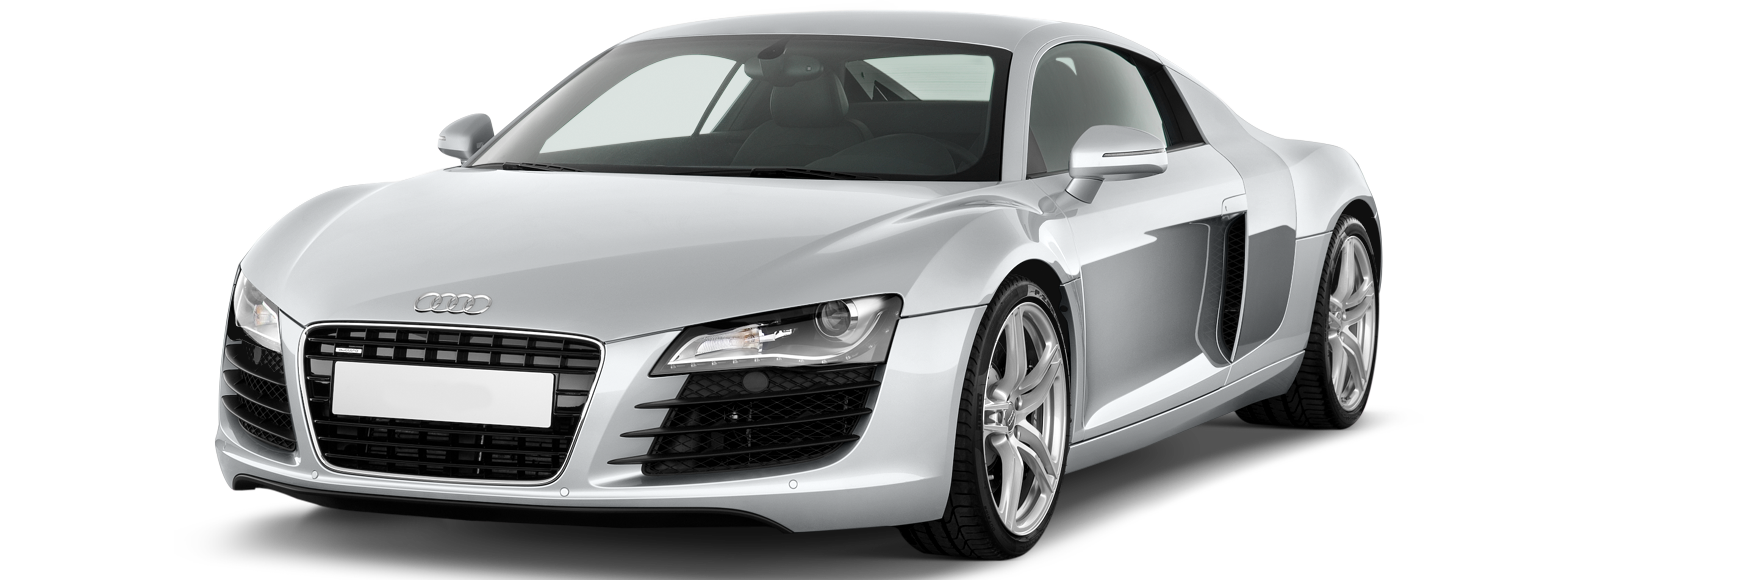 White Audi R8 Png Image - Of Cars, Transparent background PNG HD thumbnail